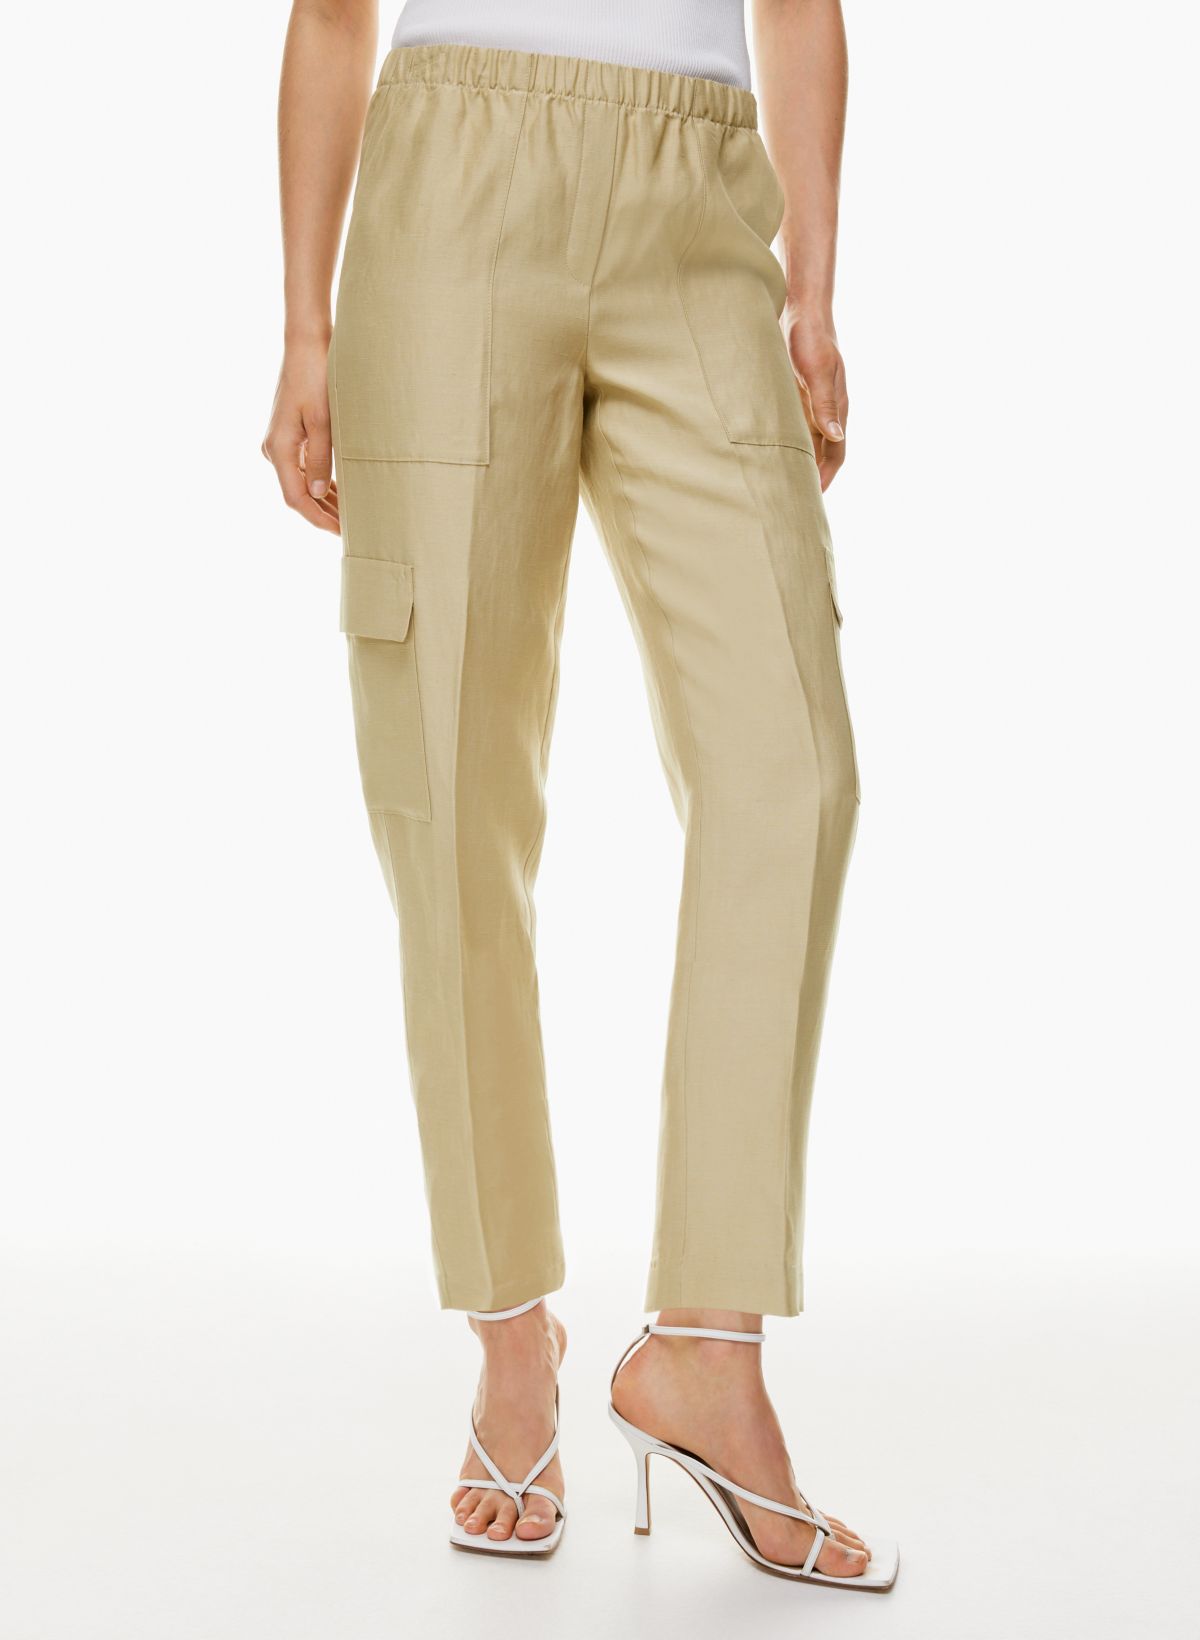 Check Cotton Trousers in Archive beige - Women